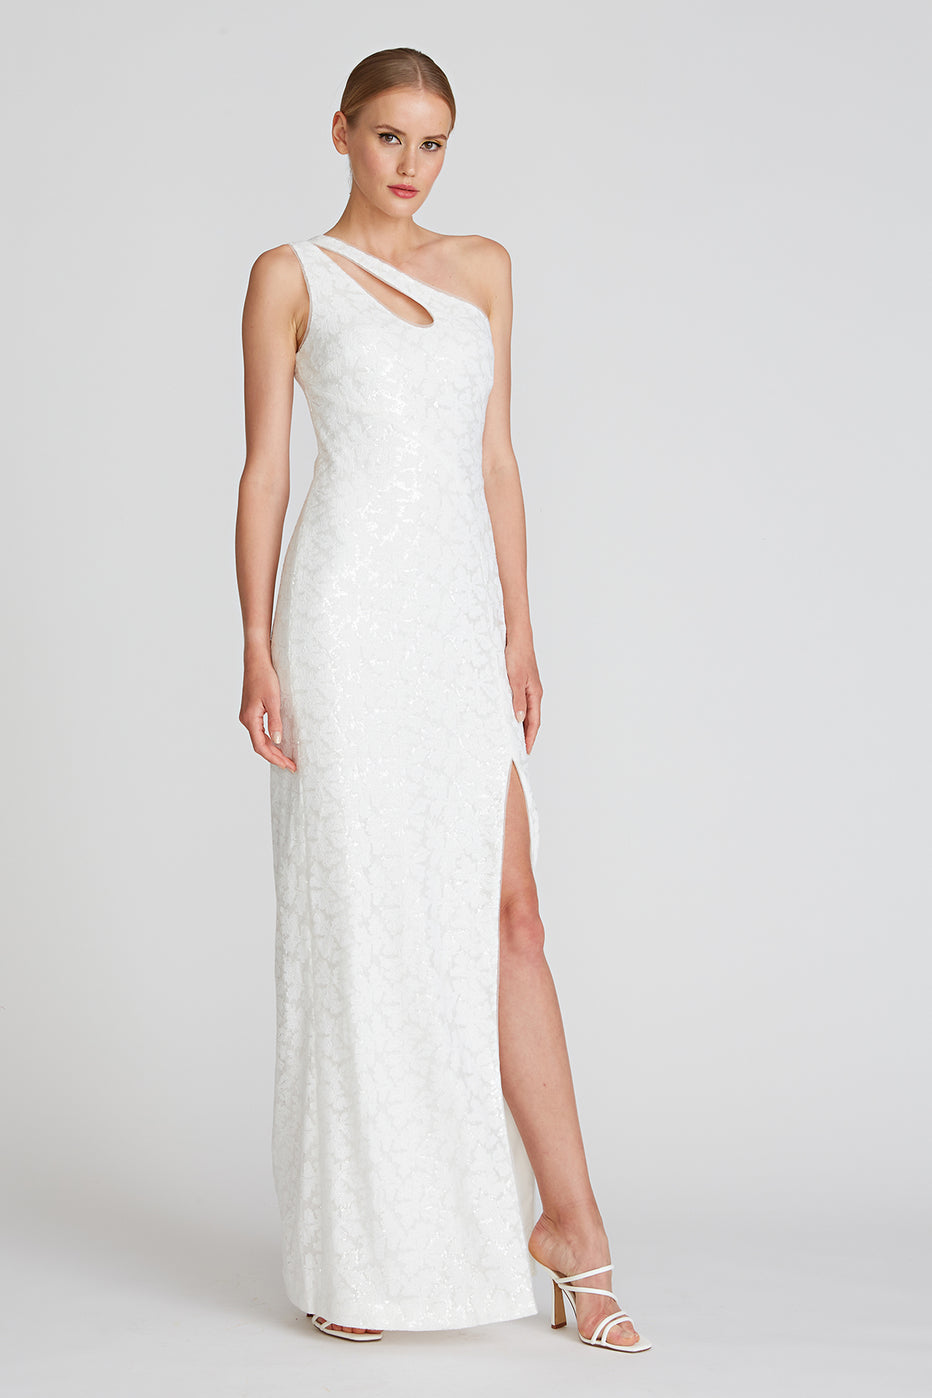 Theia - Natalia One Shoulder Gown - Ivory